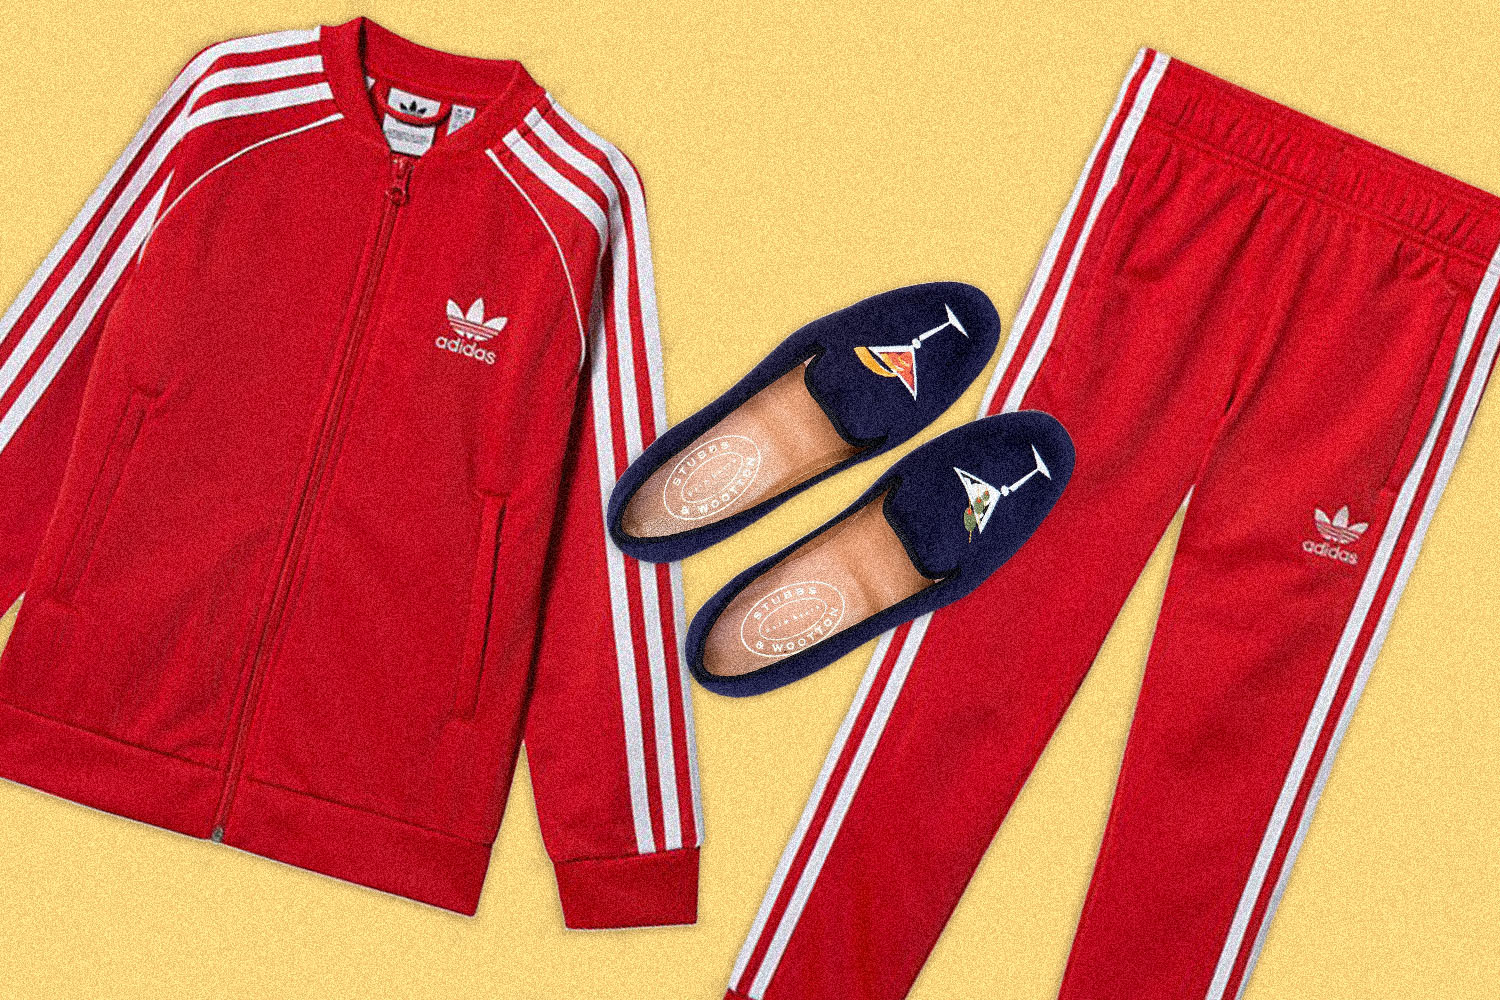 adidas sweats outfit